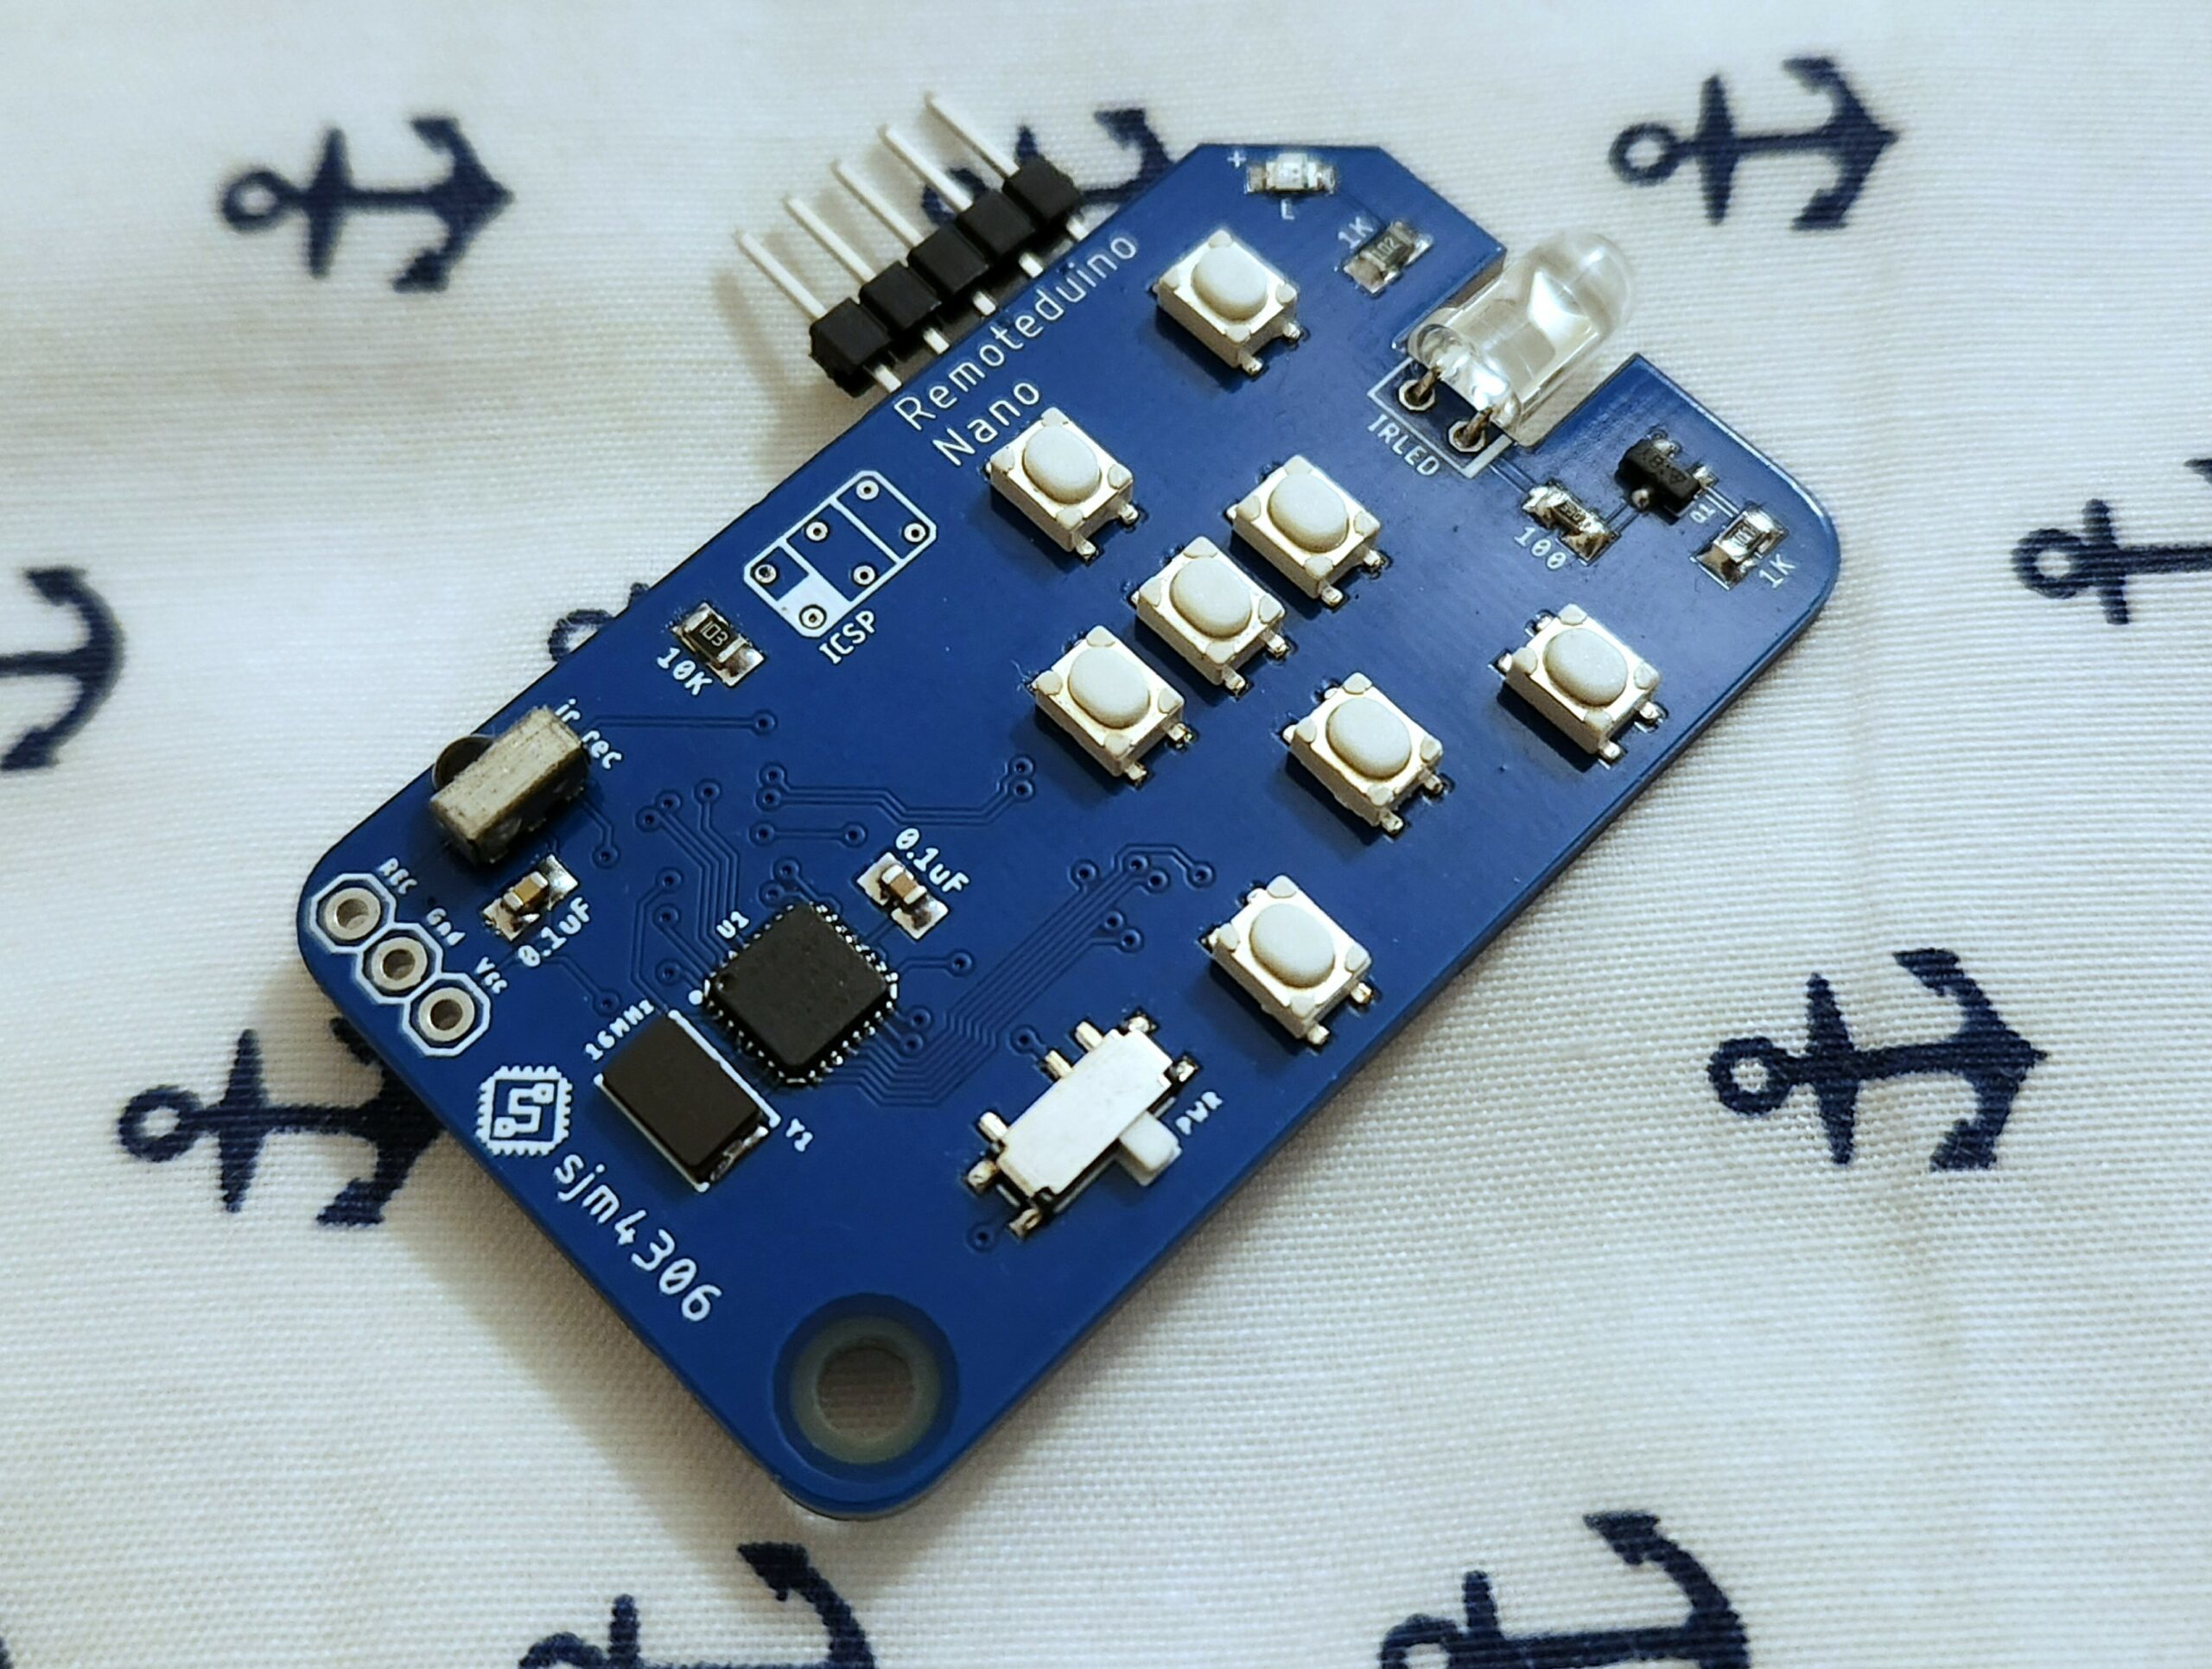 The Remoteduino Nano Is A Tiny IR Remote That’s Truly Universal